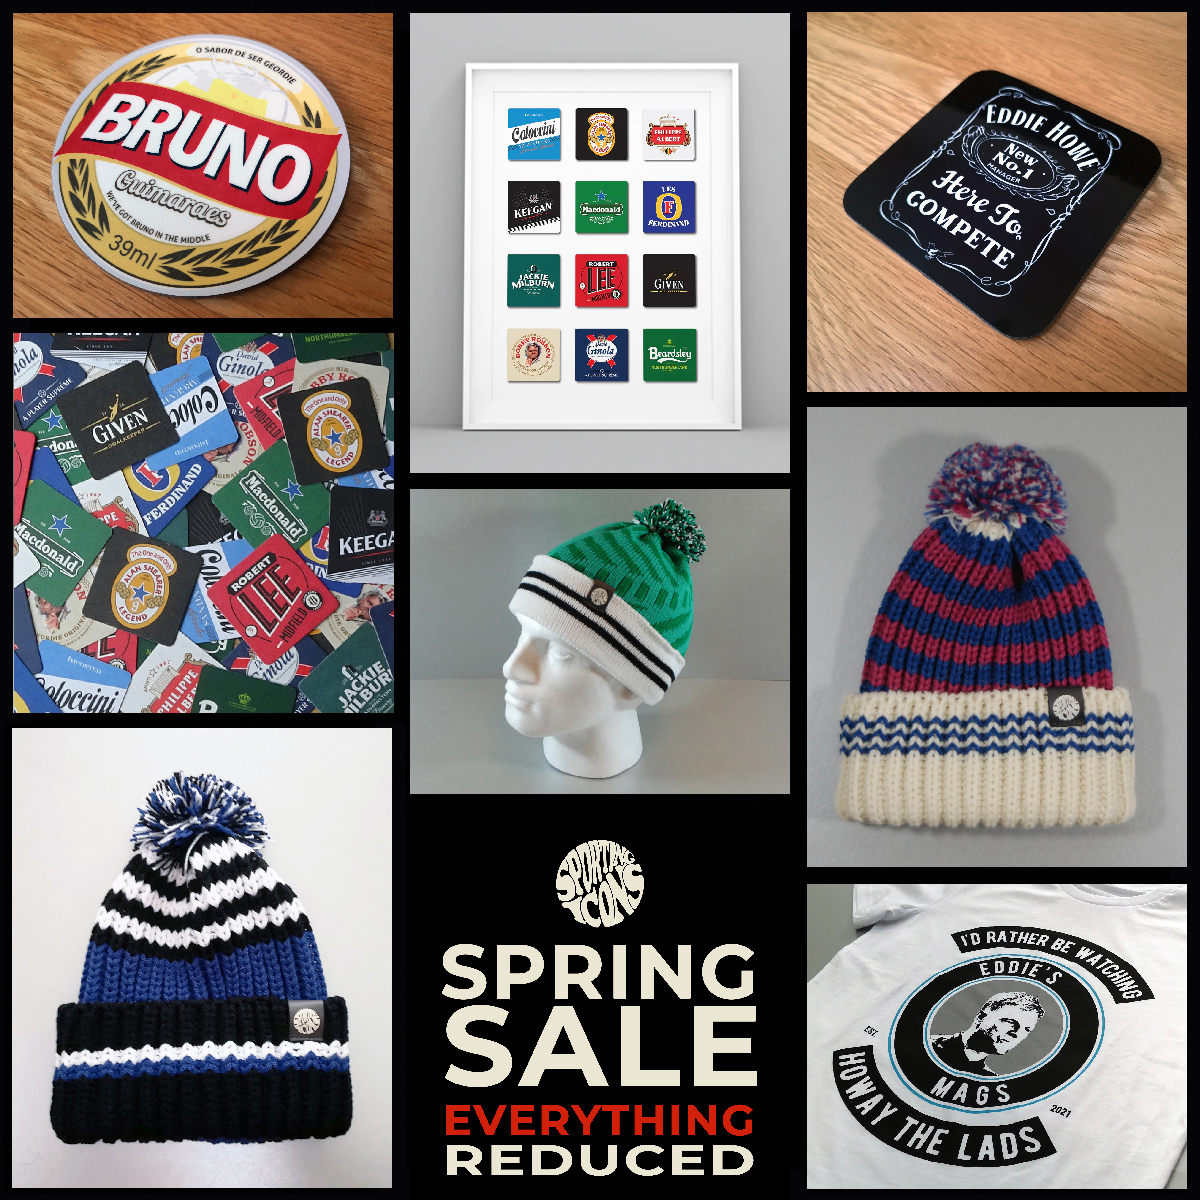 #NUFC fans, check out our Spring Sale. 🔥 Every Item Reduced 🔥 Huge Discounts 🔥 Limited Editions sportingicons.co.uk/collections/ne… #NewcastleUnited #NUFC #ToonArmy #HWTL #Mags #NEWTOT